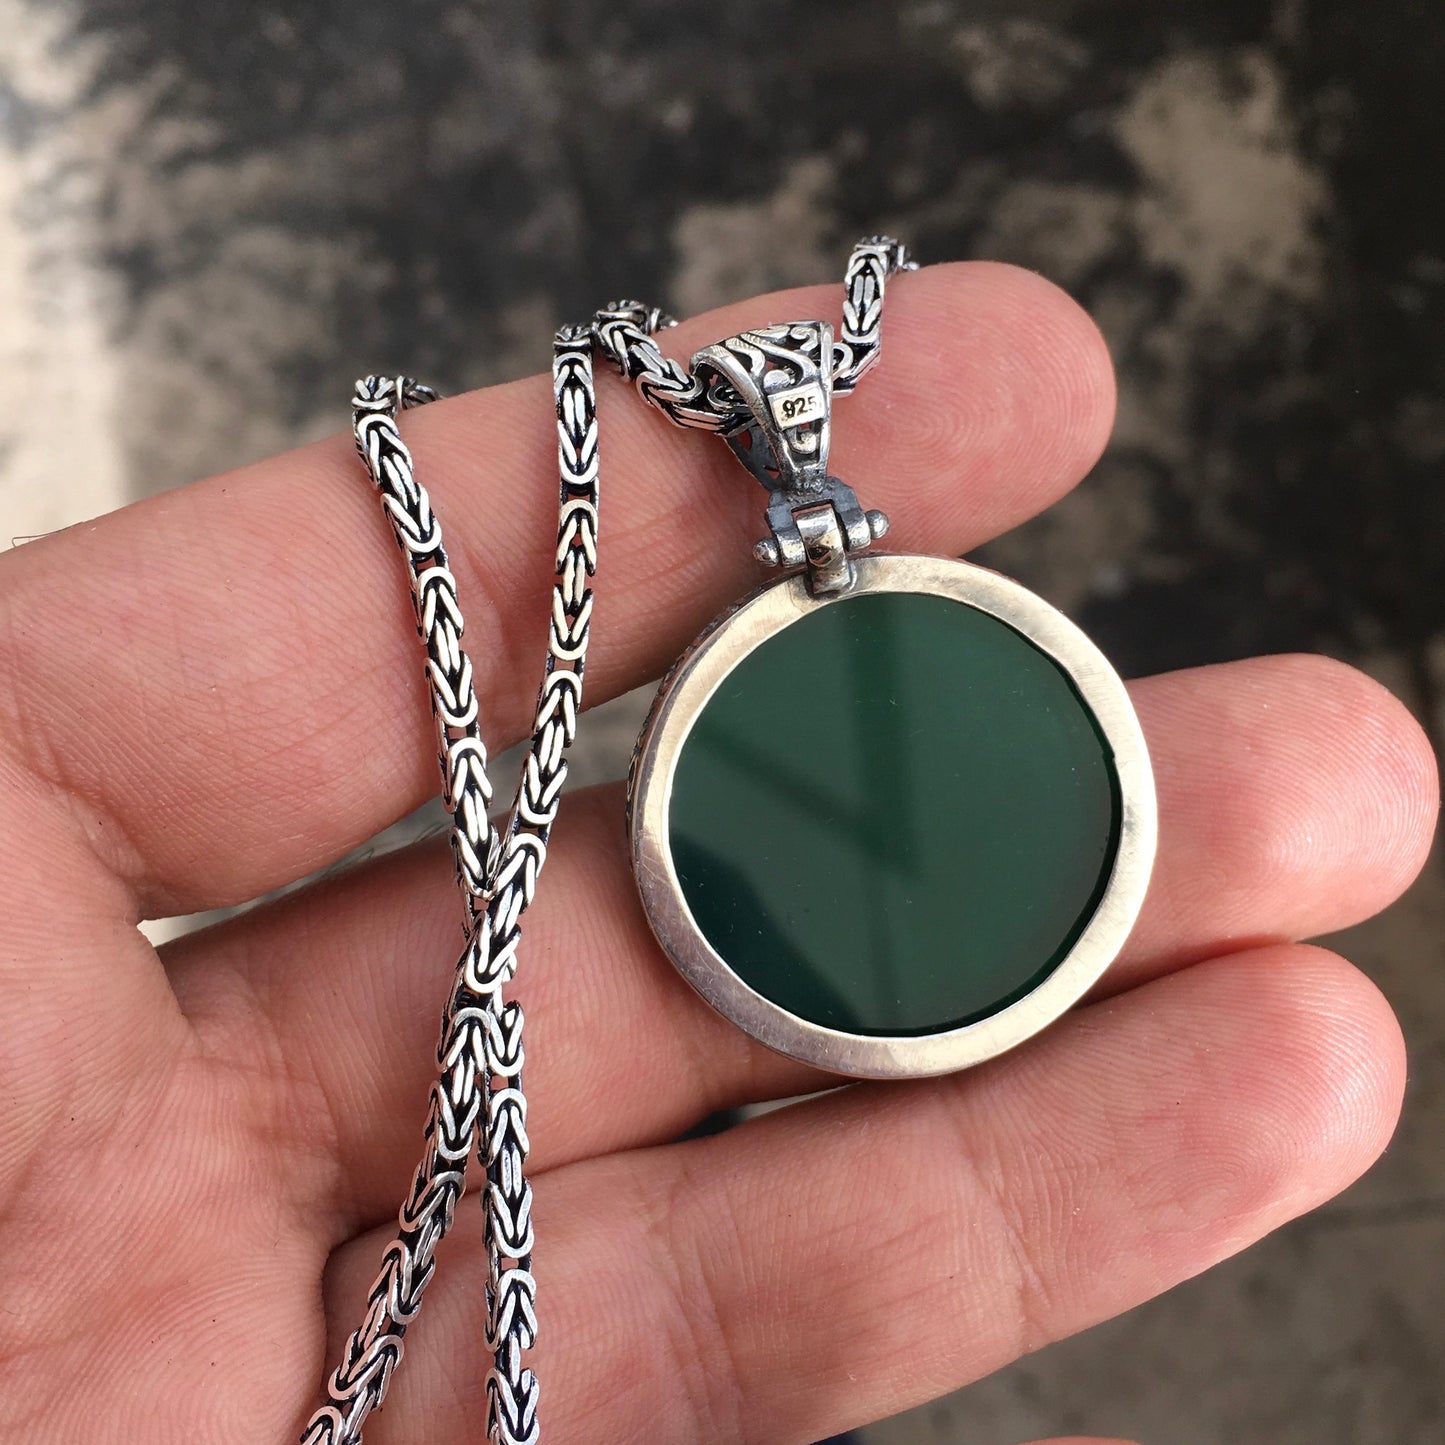 Green Agate Pendant Sterling Silver 925 Kings Chain Necklace Handengraved Seal of Solomon Talisman Amulet